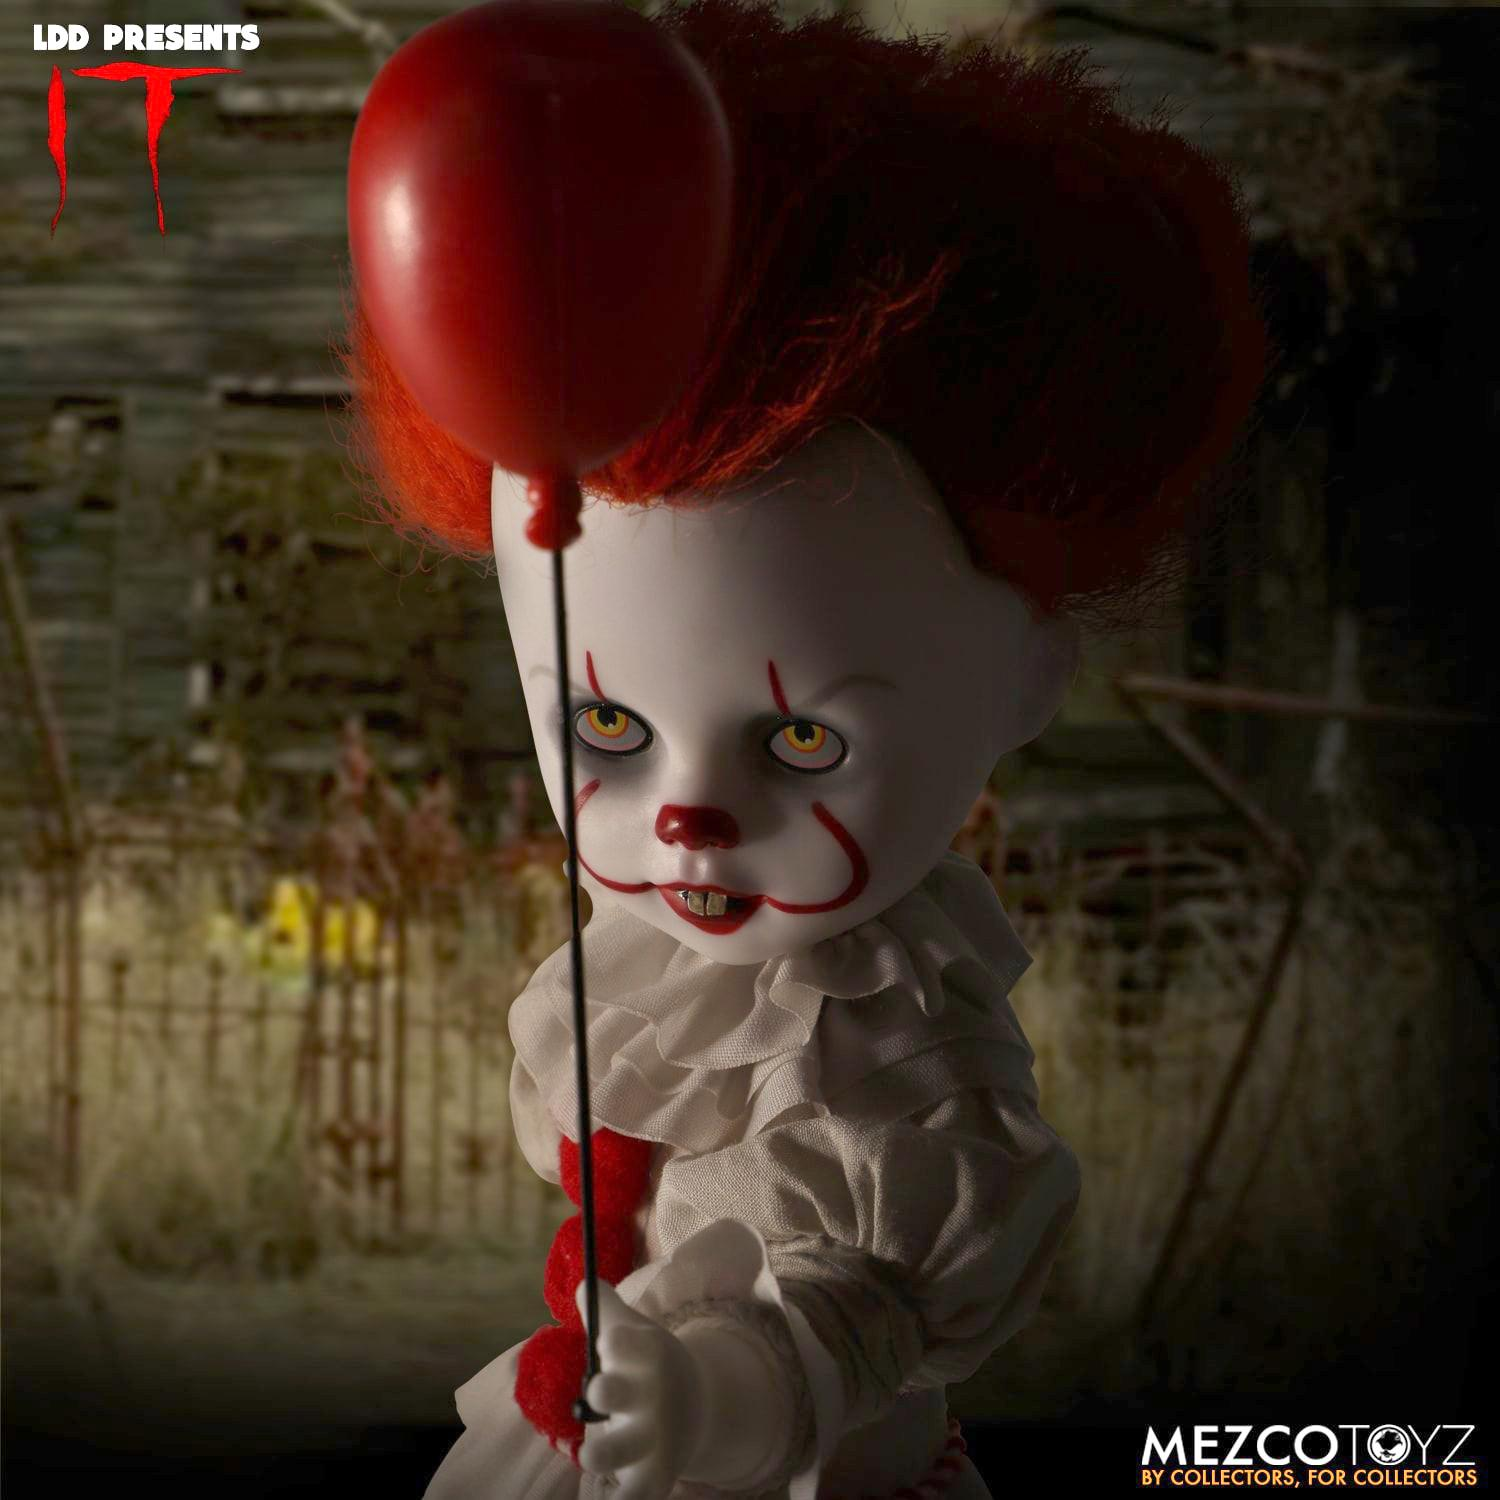 MEZCO IT TOYS / ES Puppe Puppe Living 2017: Pennywise Dead Dolls